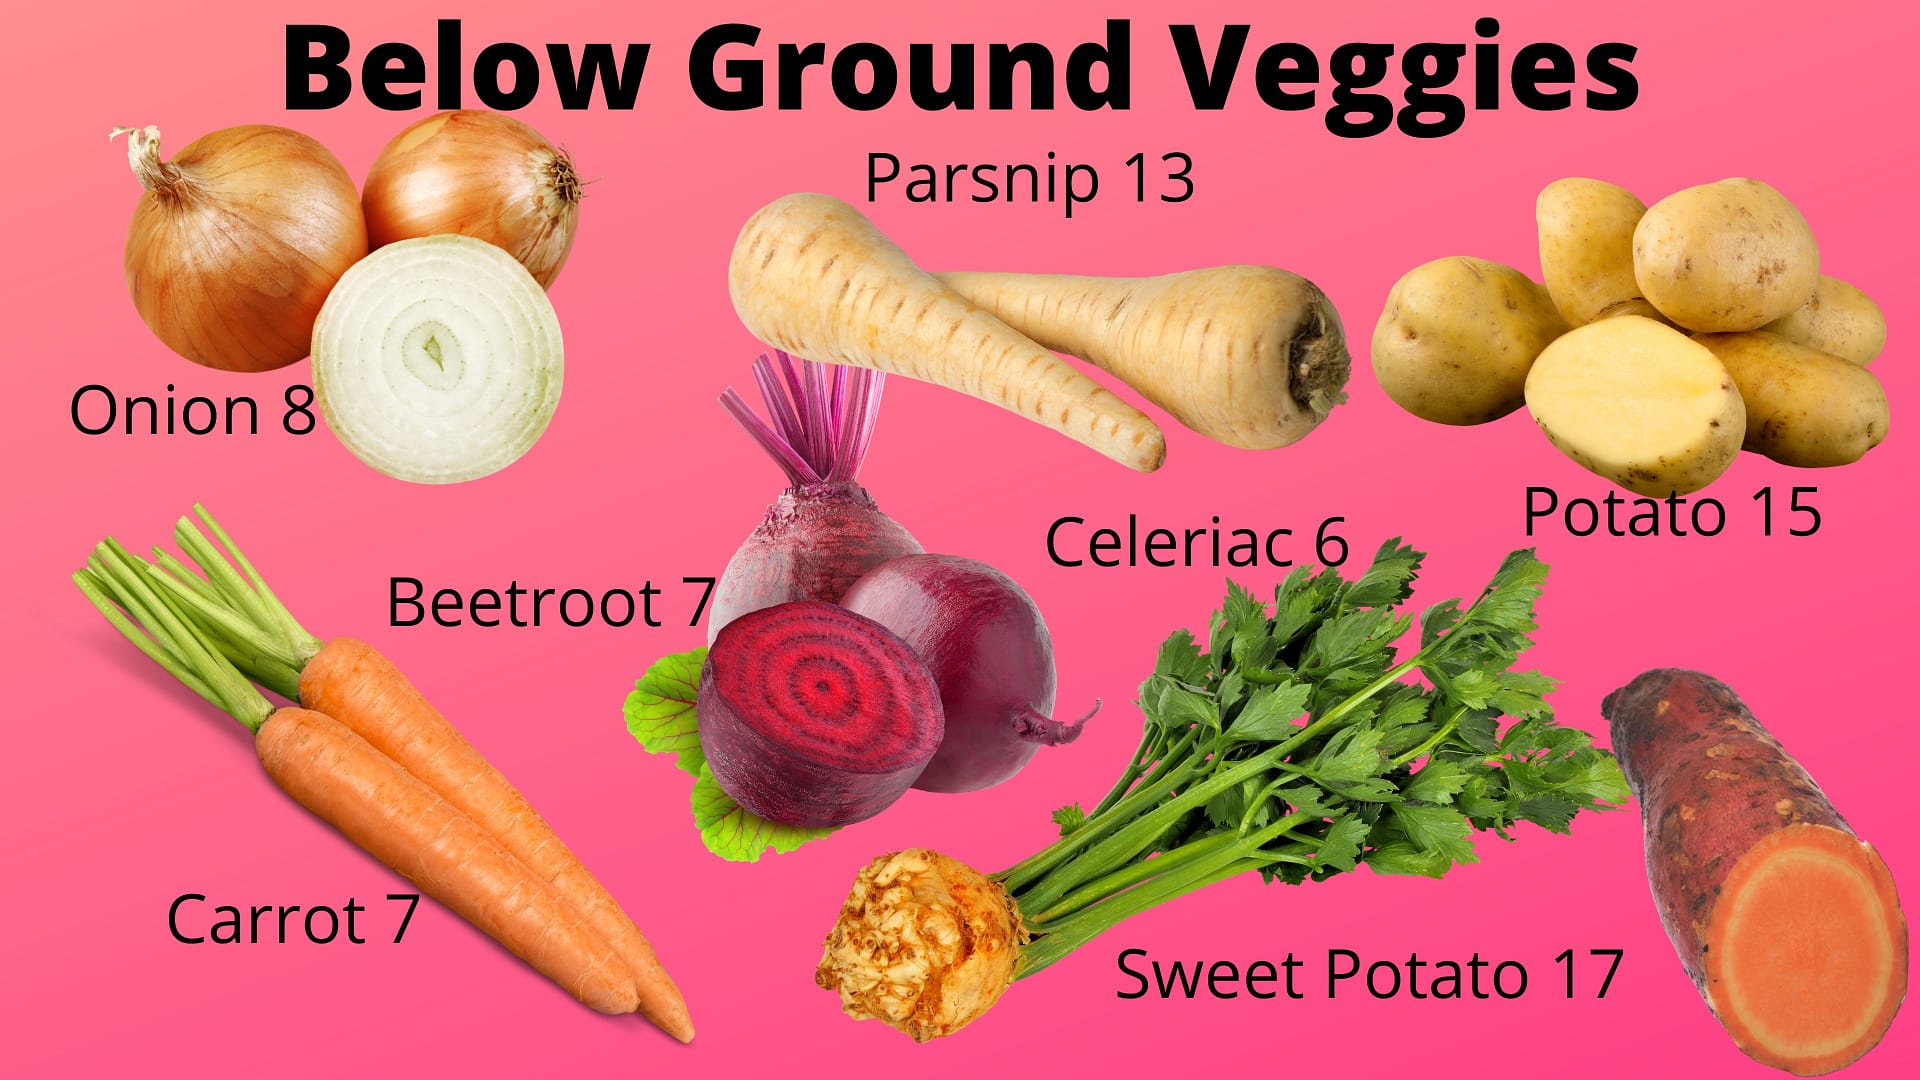 Below Ground Veggies with up to 9g of Carbs per 100g That Can Be Consumed In Moderation. 